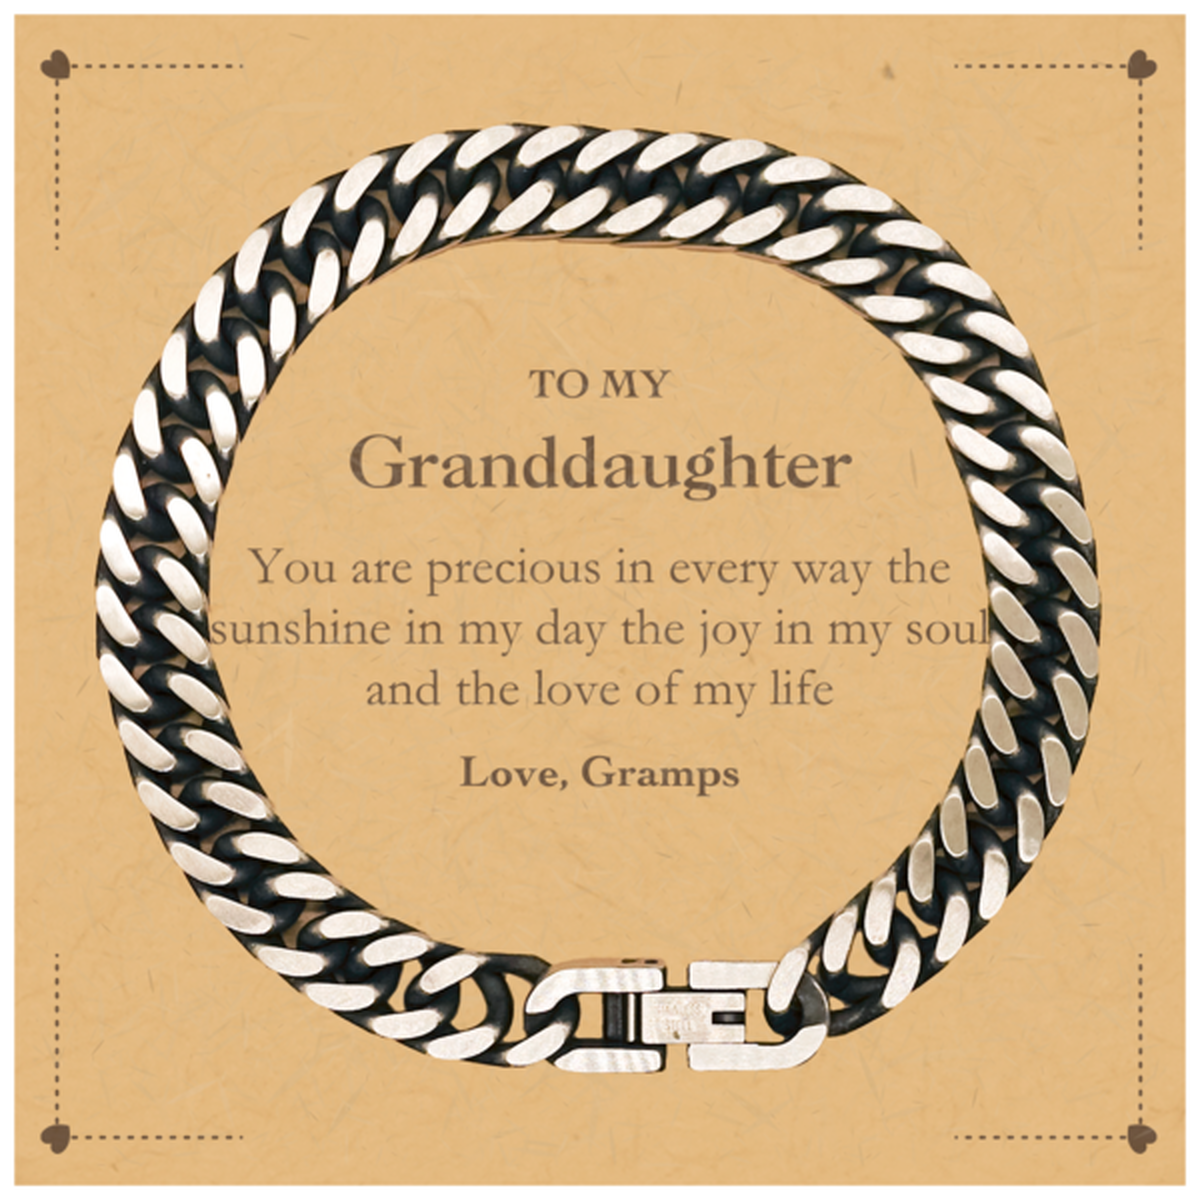 Graduation Gifts for Granddaughter Cuban Link Chain Bracelet Present from Gramps, Christmas Granddaughter Birthday Gifts Granddaughter You are precious in every way the sunshine in my day. Love, Gramps